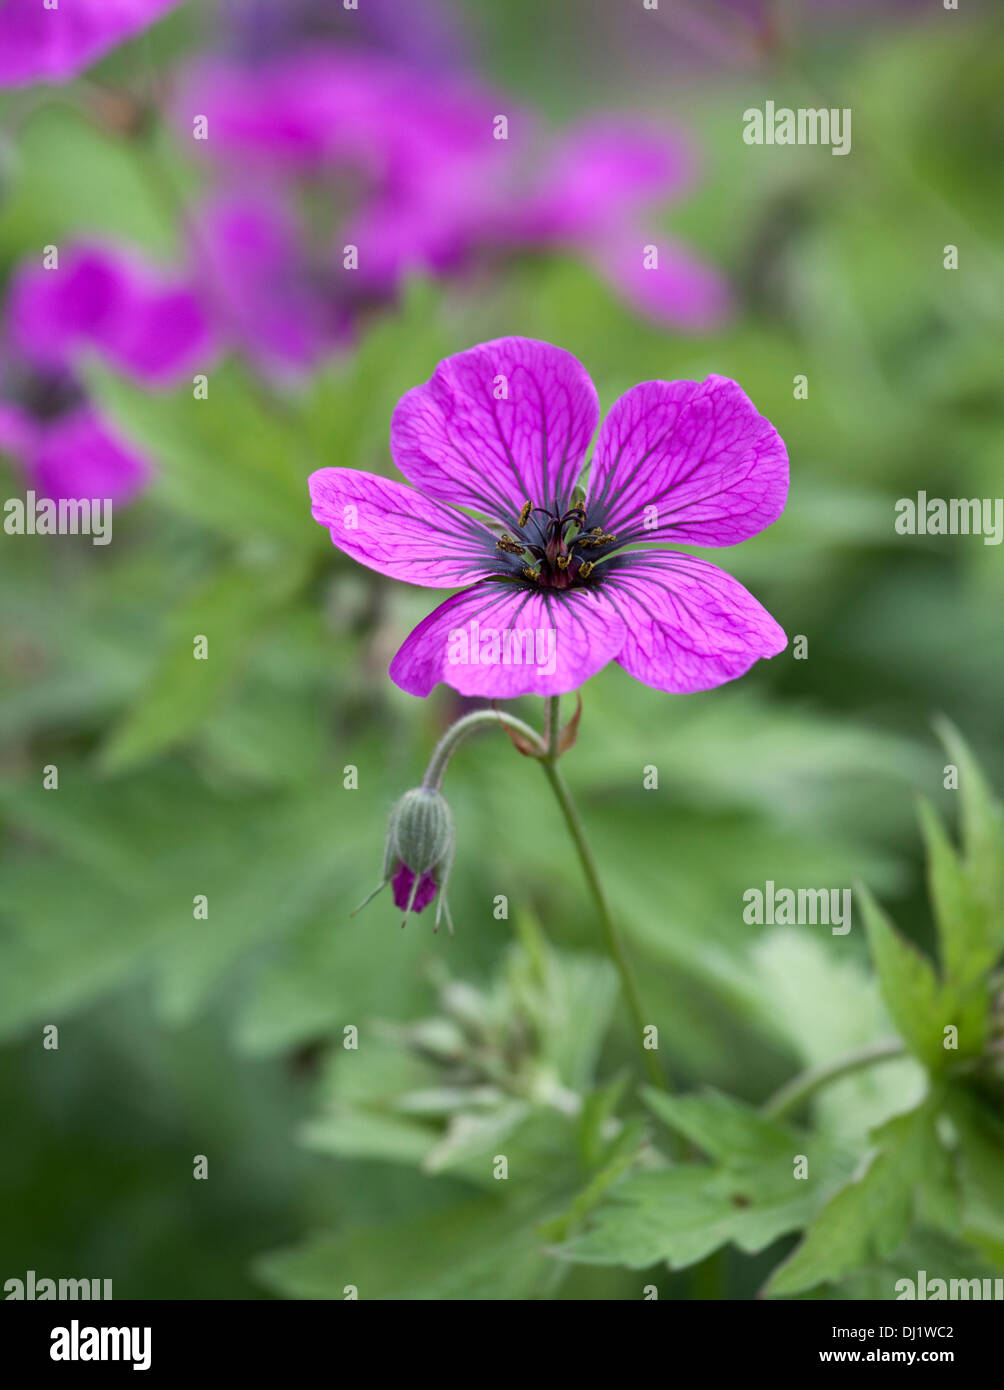 Close up of Purple Geranium Flower with shallow depth of field and focus on the stamens. Stock Photo